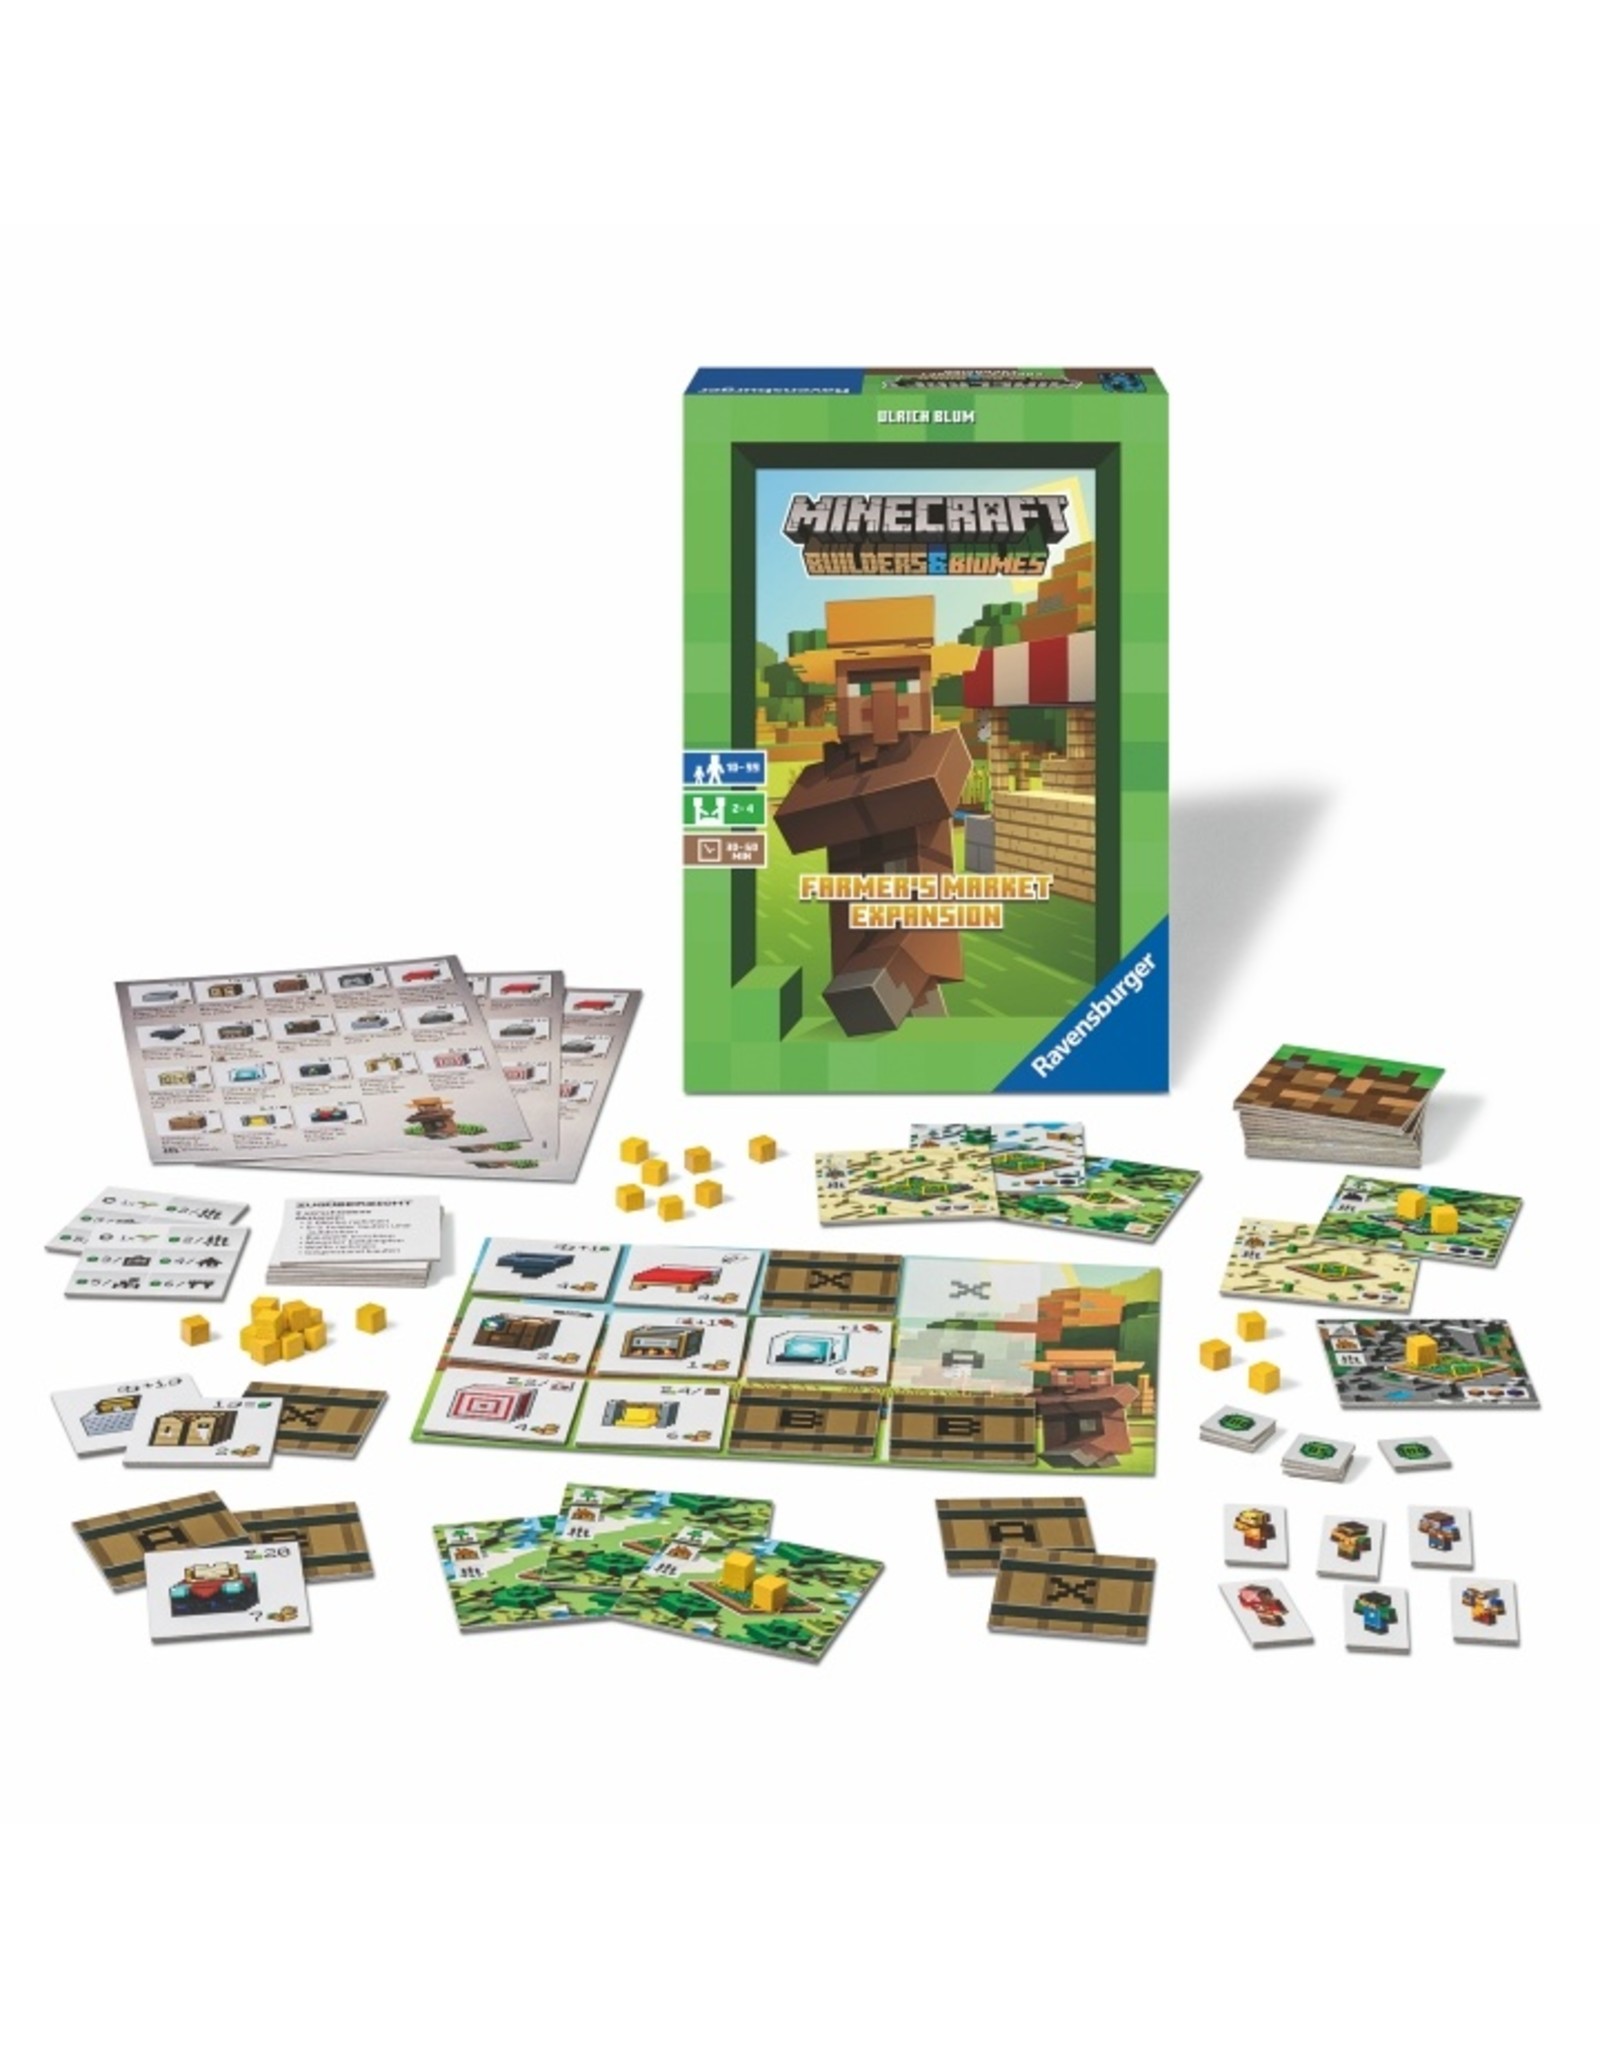 Ravensburger Minecraft: Builders and Biomes Farmer's Market Expansion